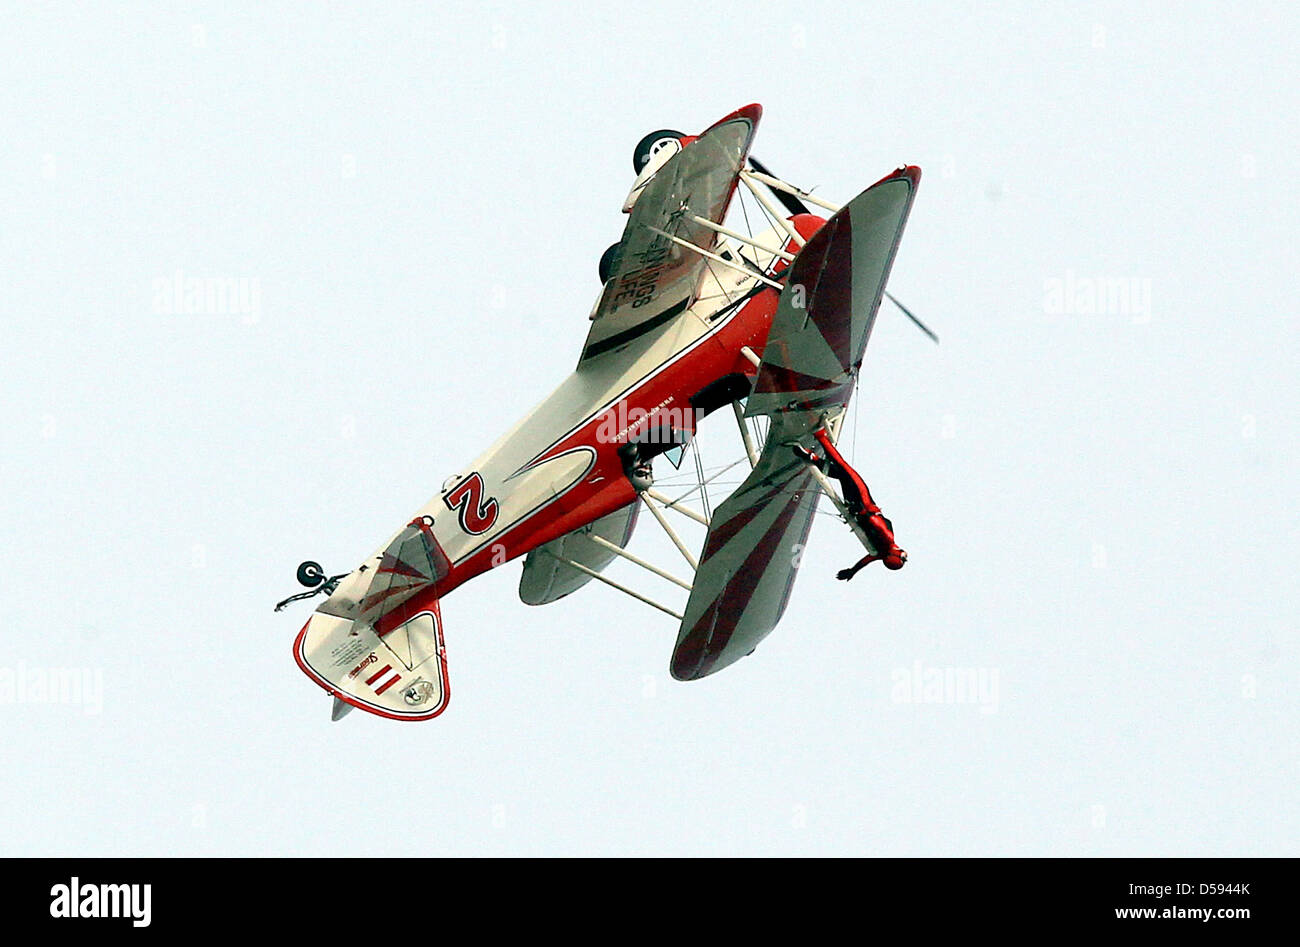 'Lady King Walker' Peggy Krainz performs acrobatics on the deck of a Boeing Stearman PT 17 during the International Aerospace Show ILA 2010 in Schoenefeld Germany, 11 June 2010. A total of 1,153 exhibitors from 47 nations present some 300 airplanes, products and product ideas from 08 June to 13 June 2010. Photo: WOLFGANG KUMM Stock Photo